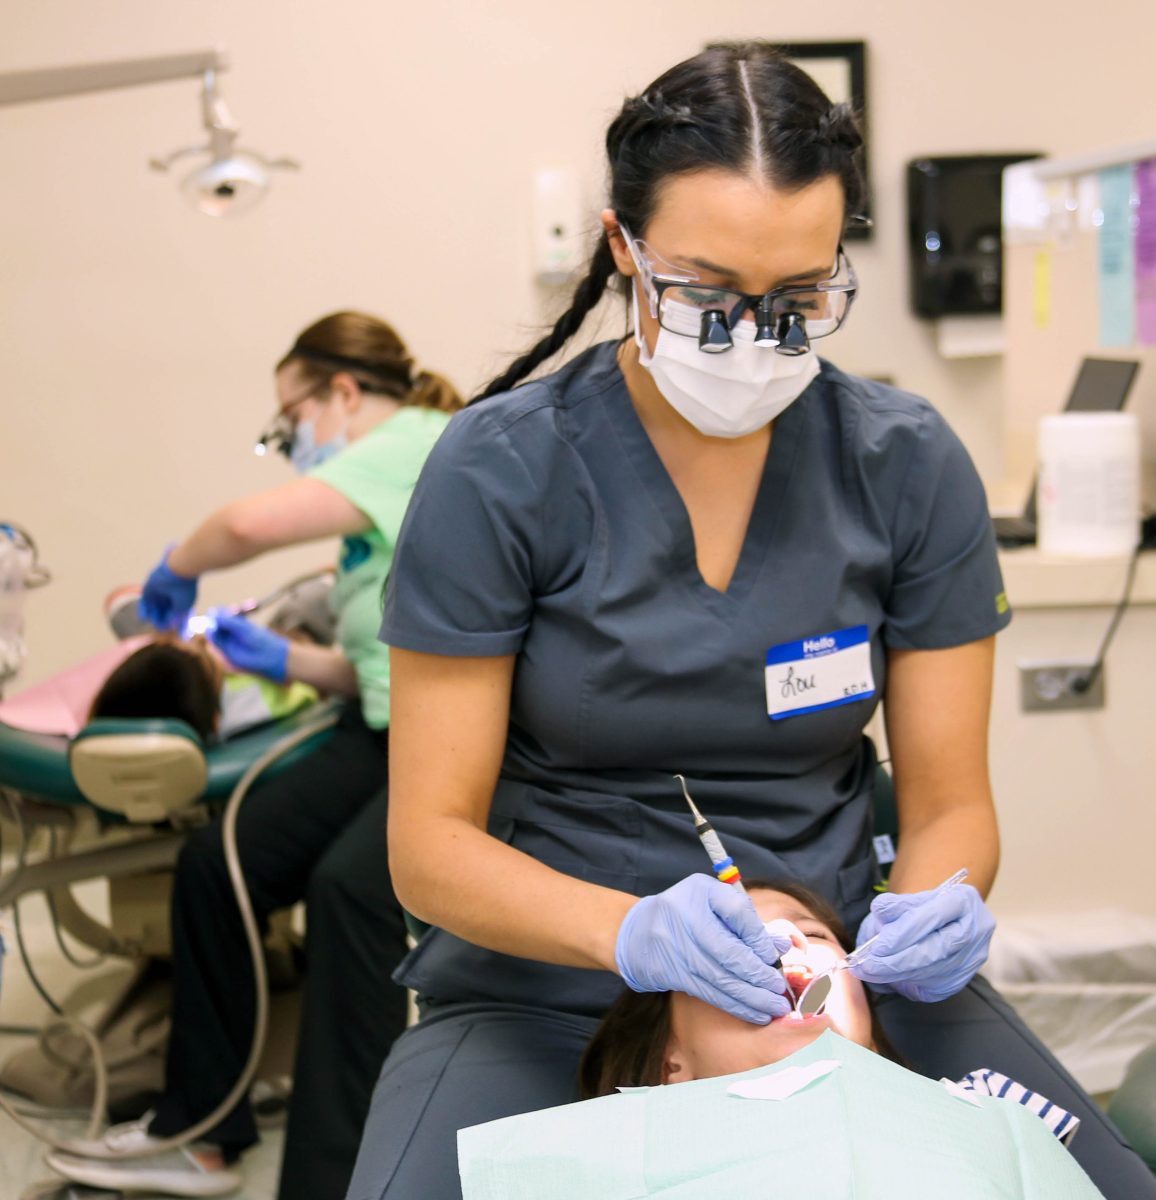 Blinn’s dental hygiene program offers dental services to the public for $20 at its clinic in Bryan.